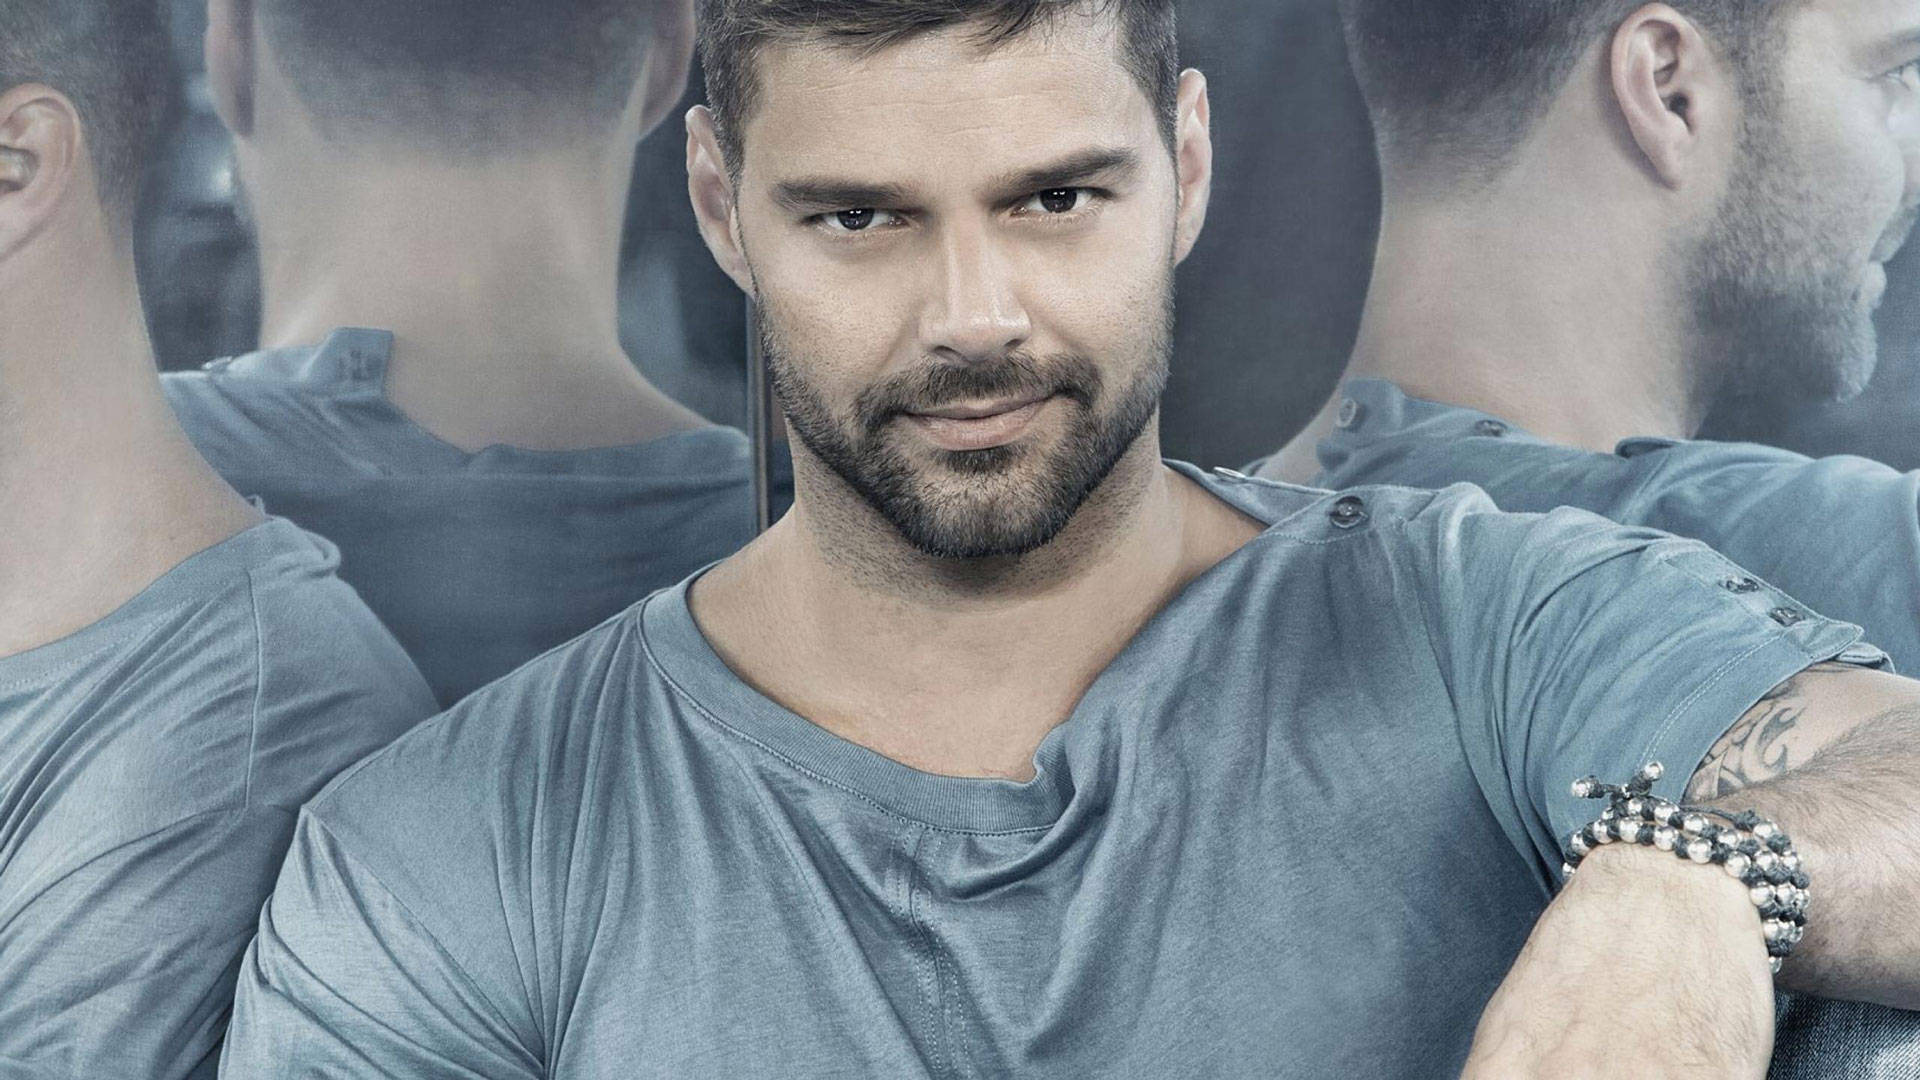 Top 999+ Ricky Martin Wallpaper Full HD, 4K✅Free to Use